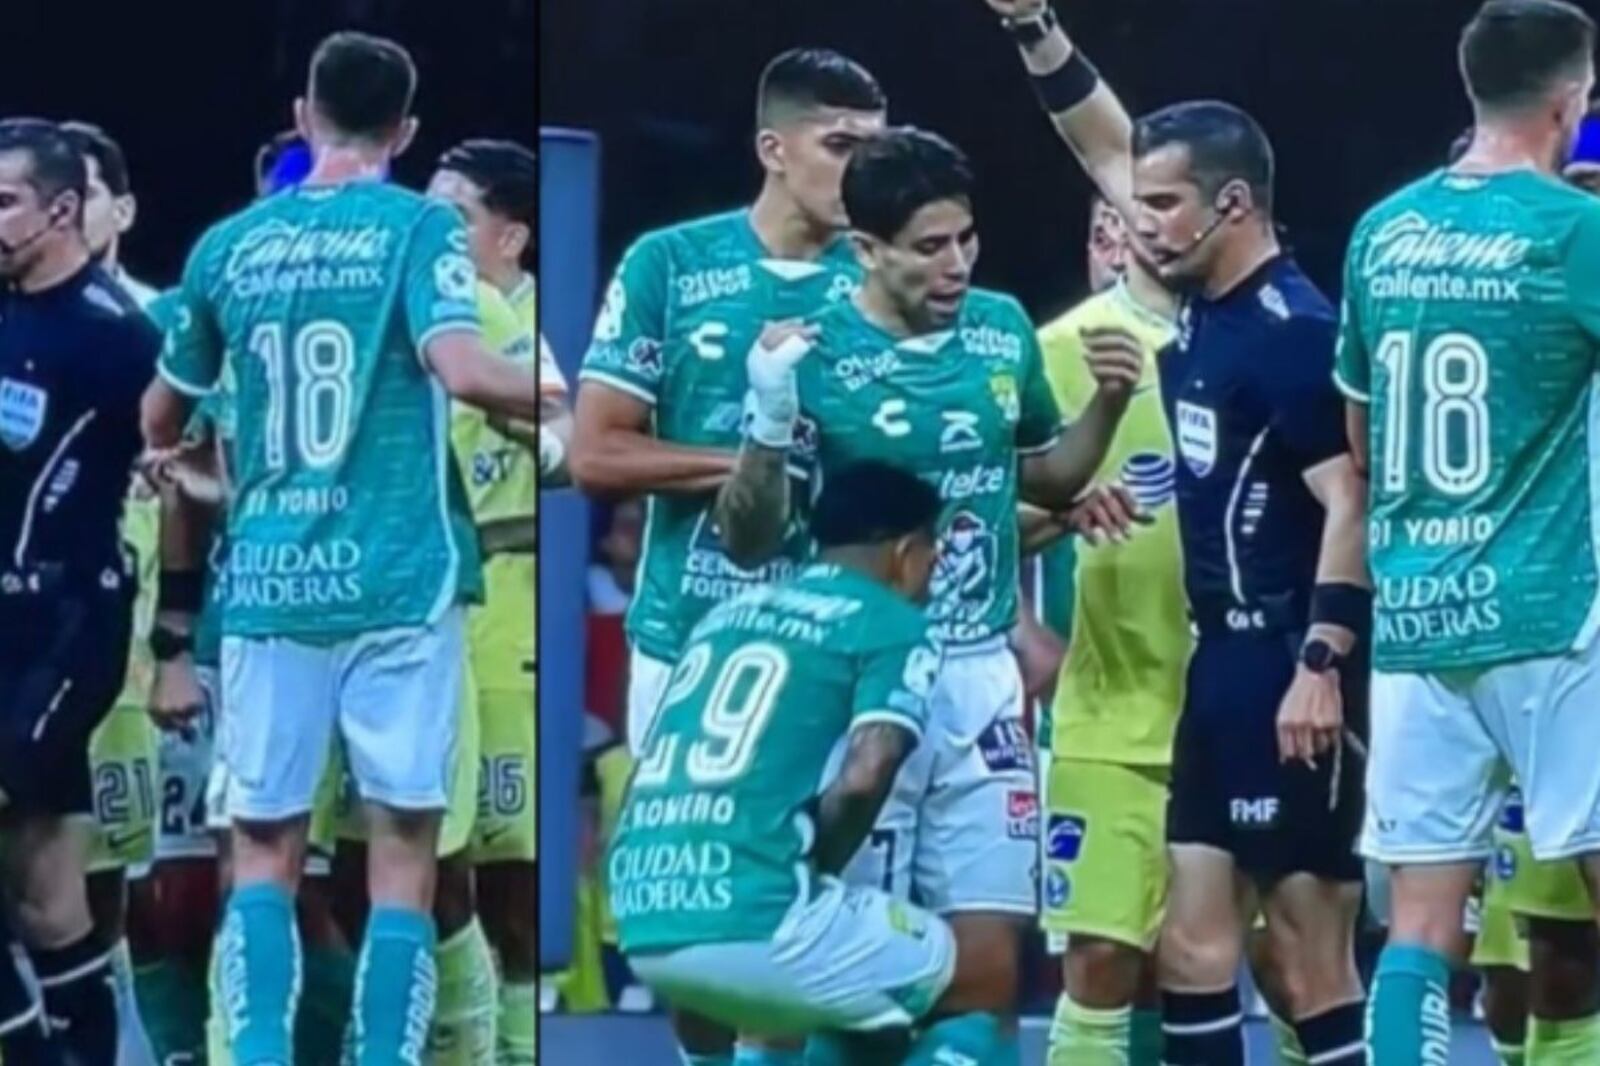 Fernando Hernández and the money he lost for hitting the León player